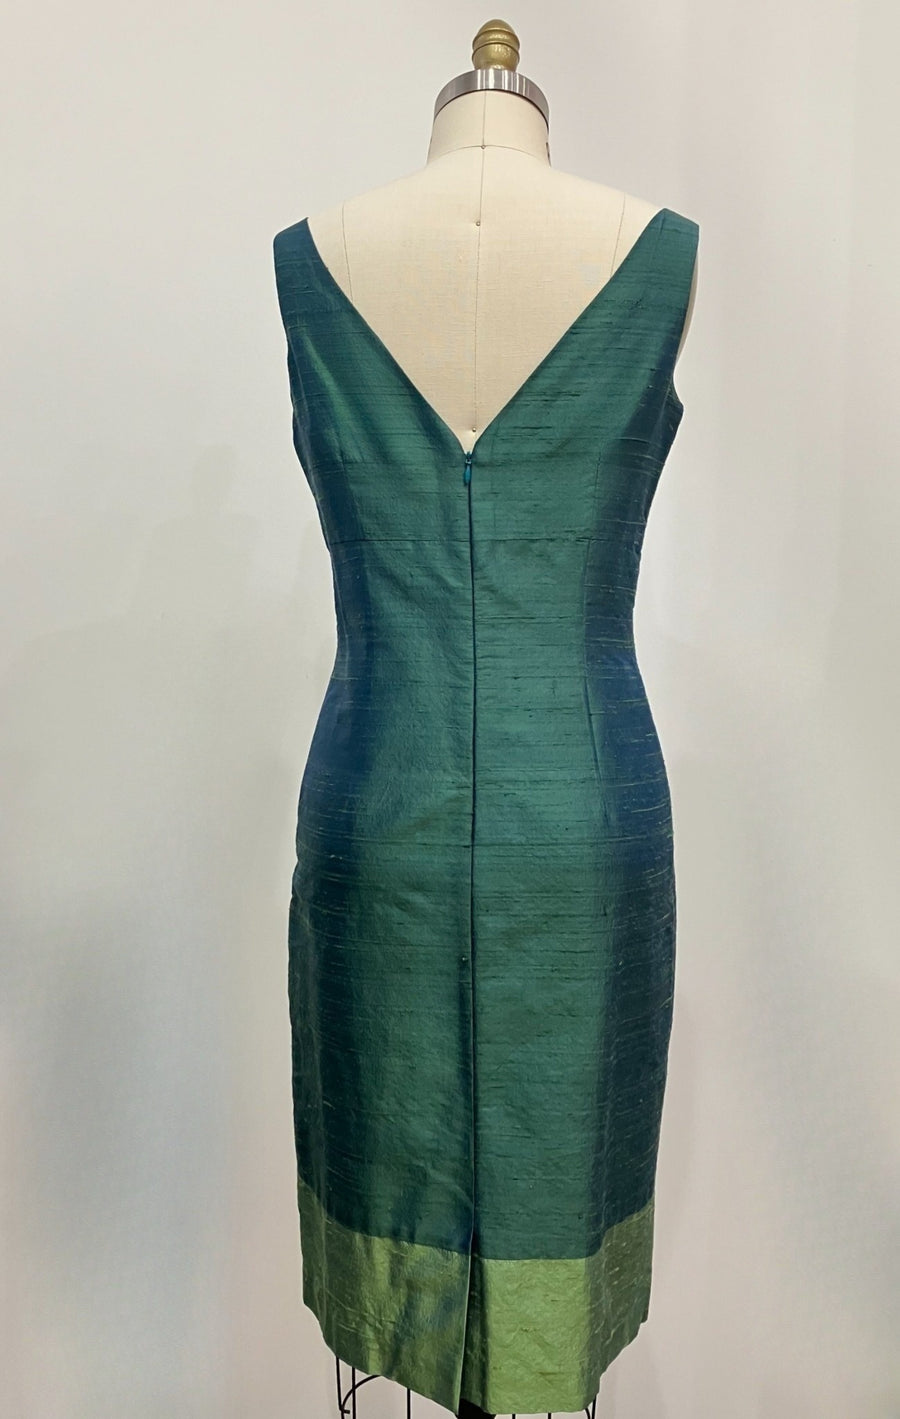 Teal V-neck Sheath with Contrast, size Small